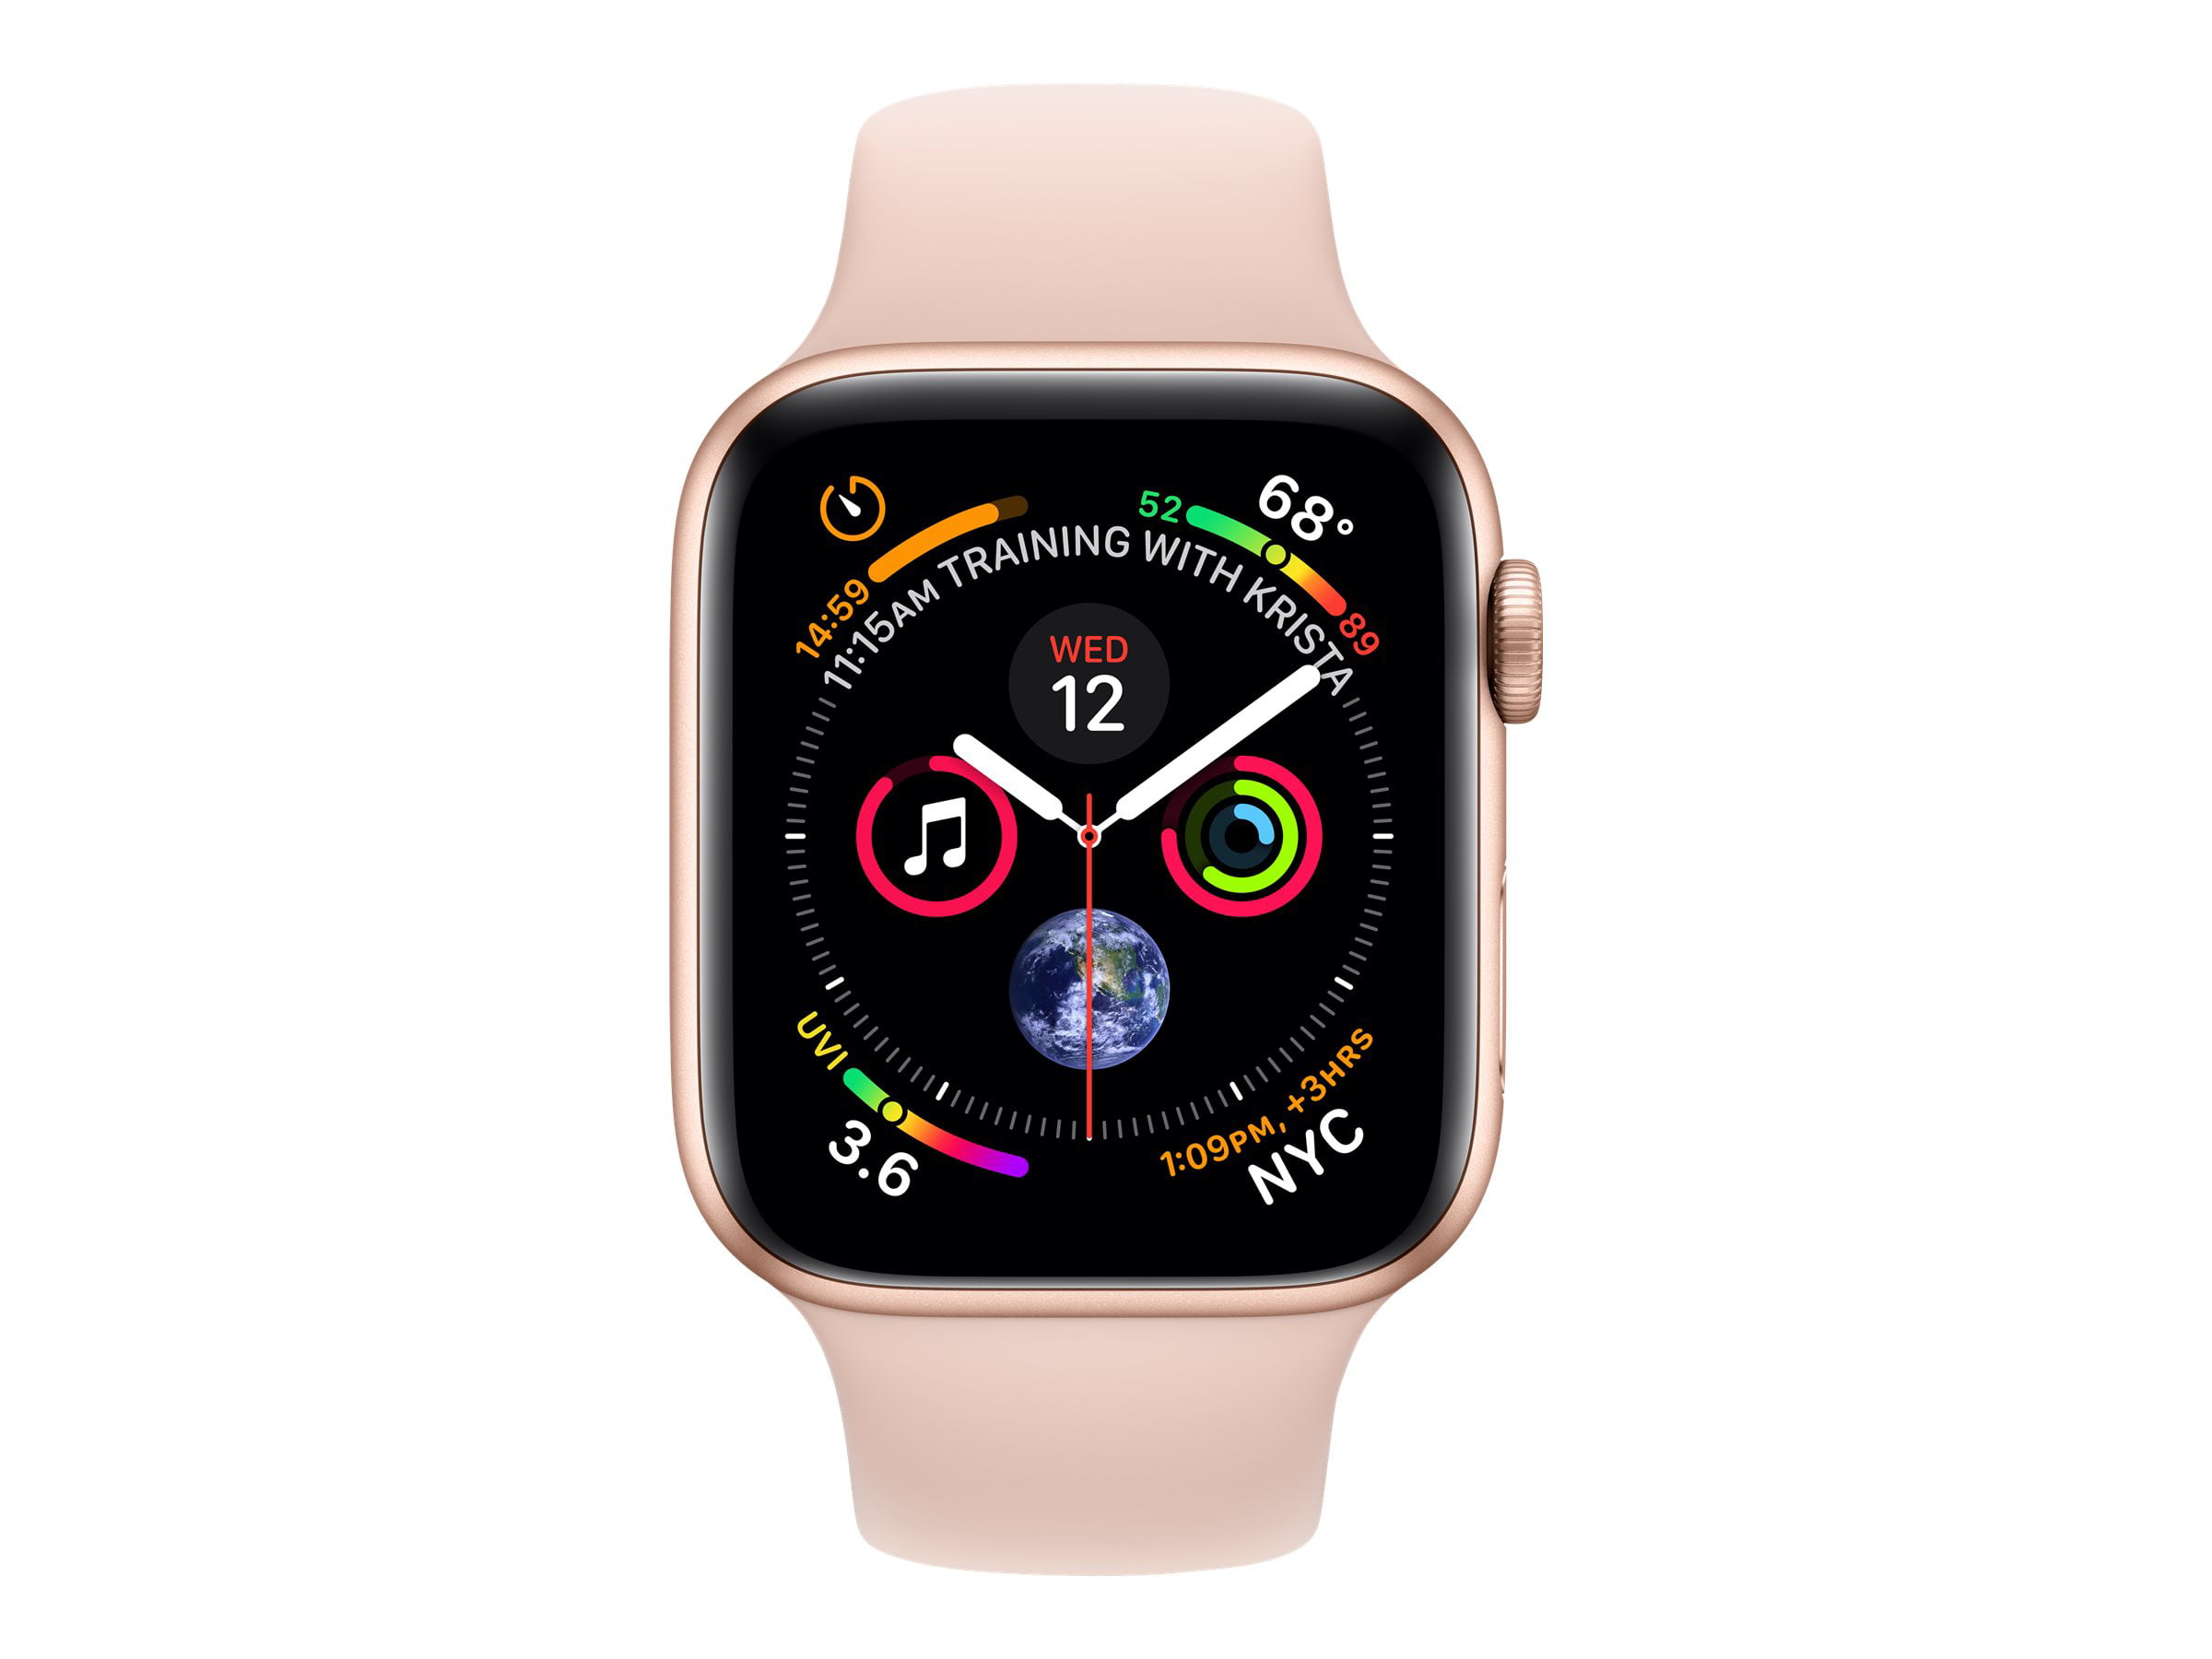 Apple Watch Series 4 (GPS + Cellular) - 44 mm - gold aluminum - smart watch  with sport band - fluoroelastomer - pink sand - wrist size: 5.51 in - 8.27  